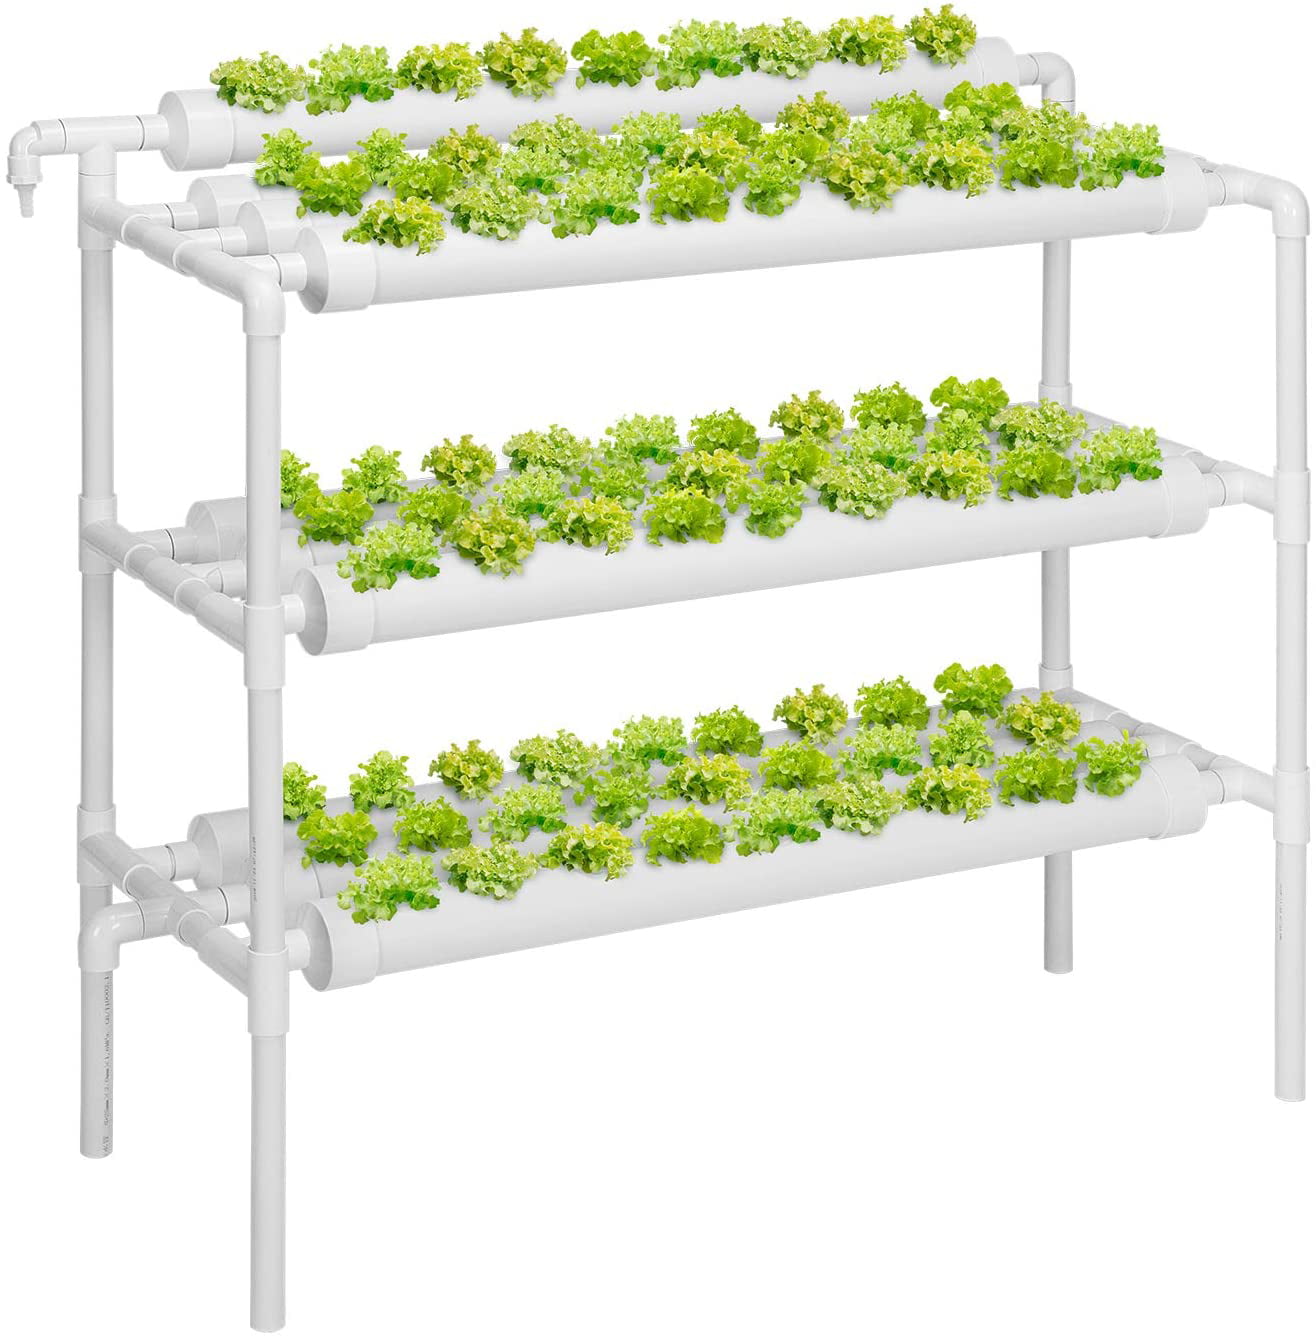 10-pipe 4-layer Hydroponic Site Grow Kit Garden Vegetable Planting System Kit 